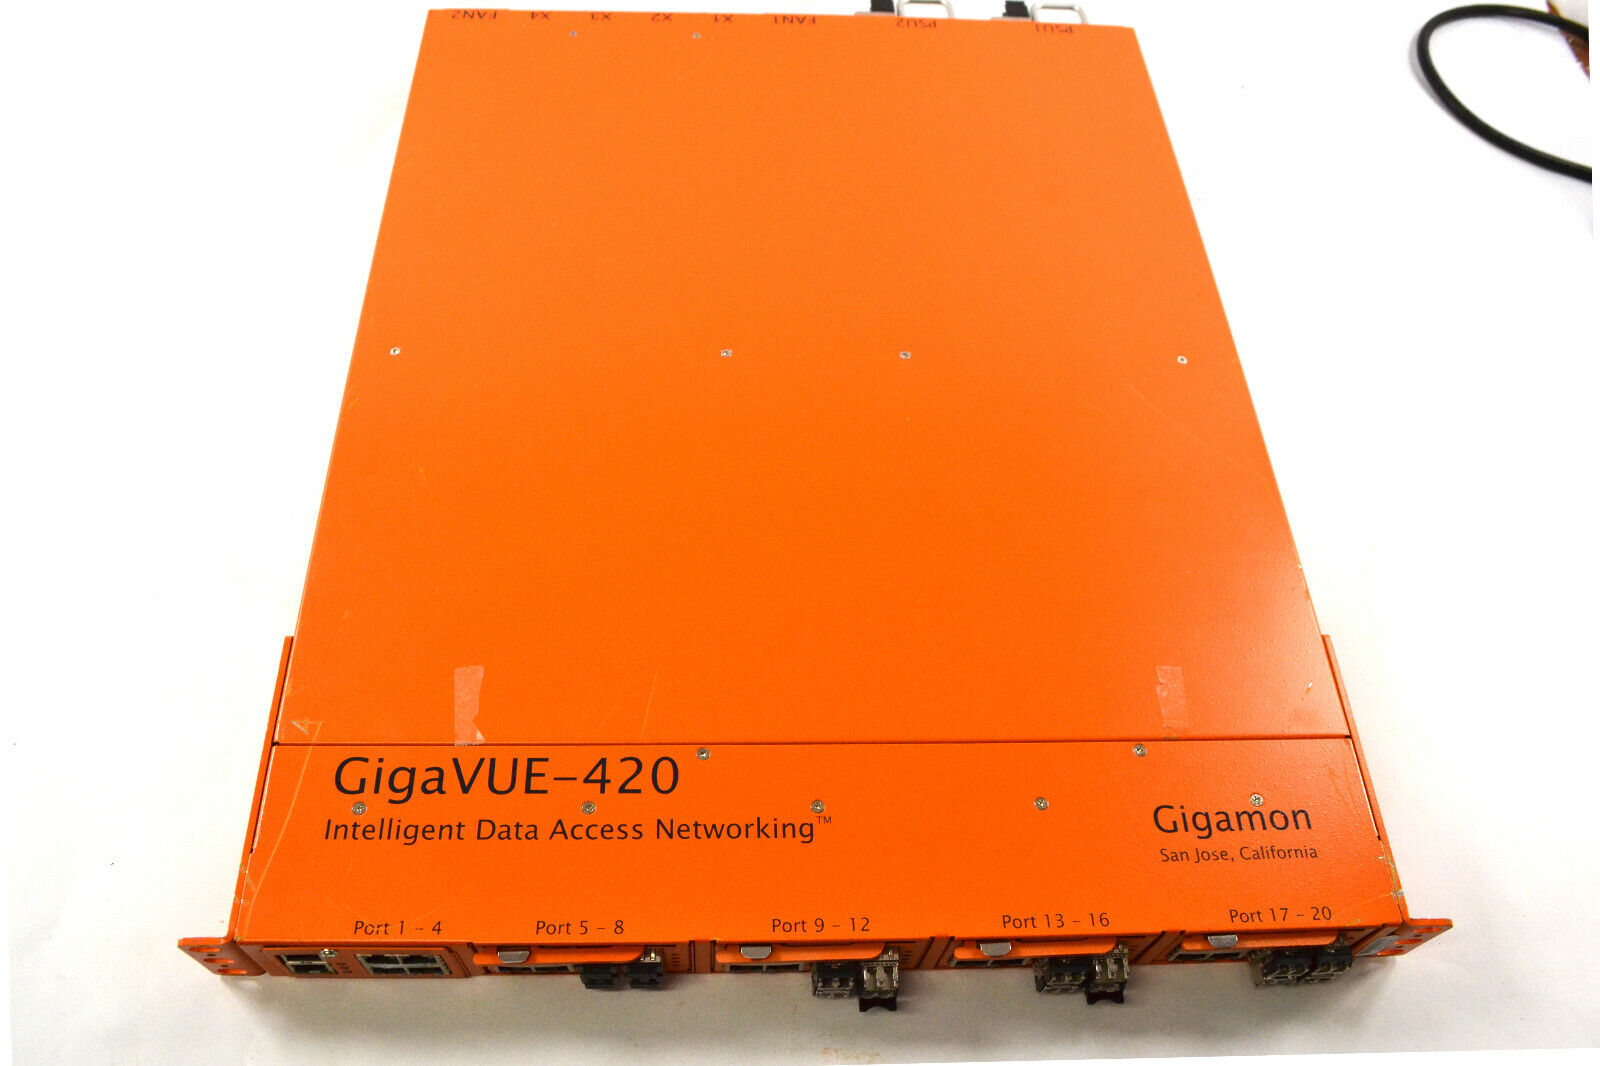 Gigamon Gigavue -420 Data Access systems 8 slots w/ DC PSUs